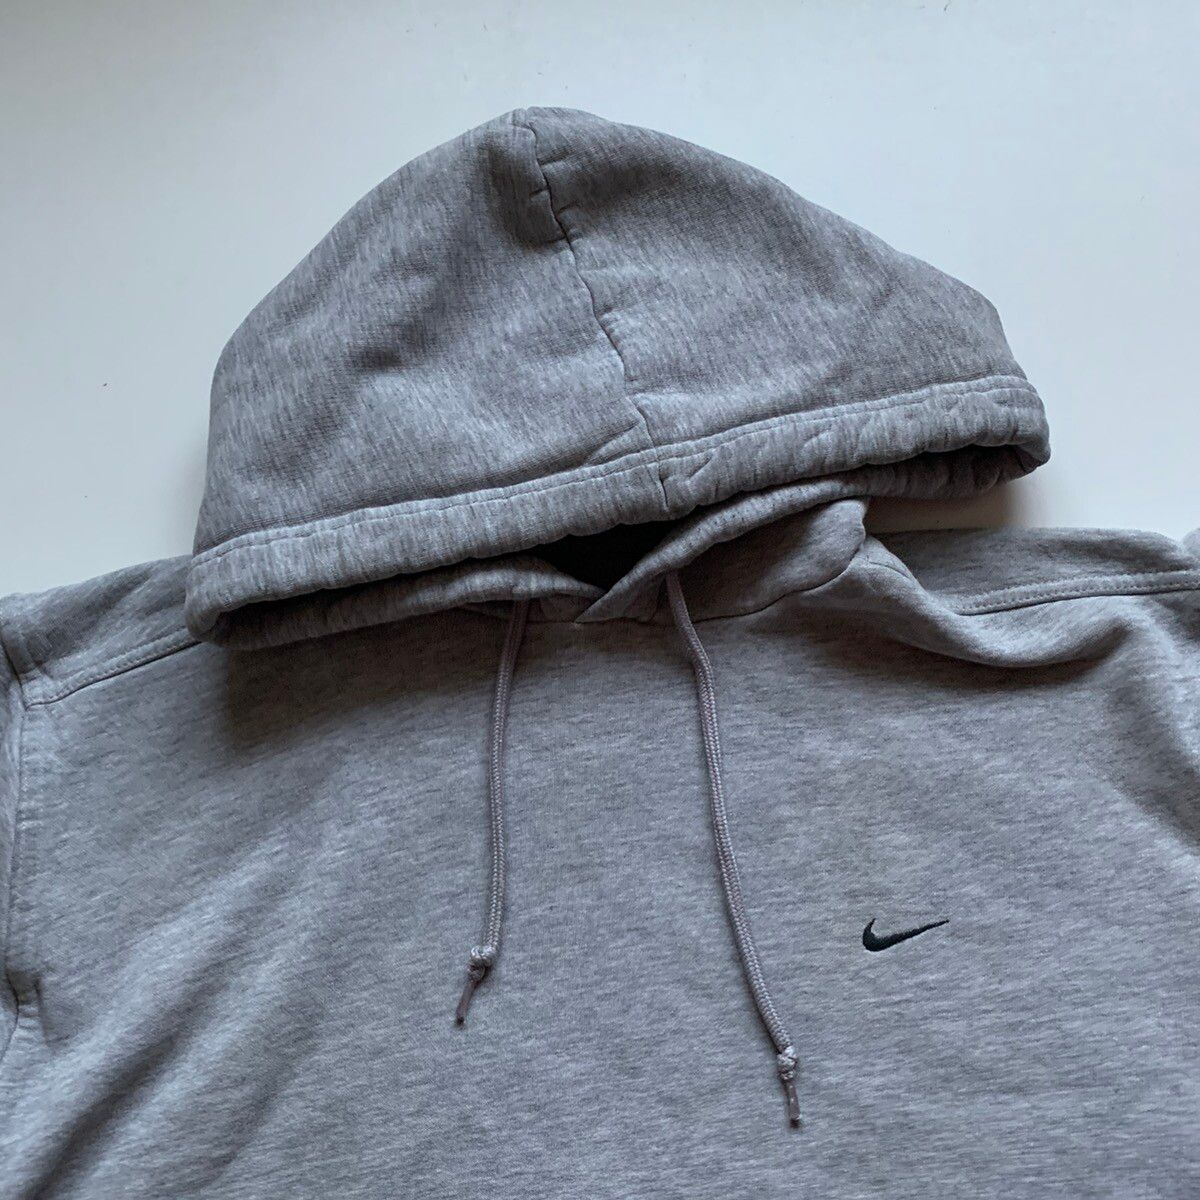 Nike Vintage 90s Nike embroidered swoosh hoodie sweater grey rare Size US M / EU 48-50 / 2 - 2 Preview